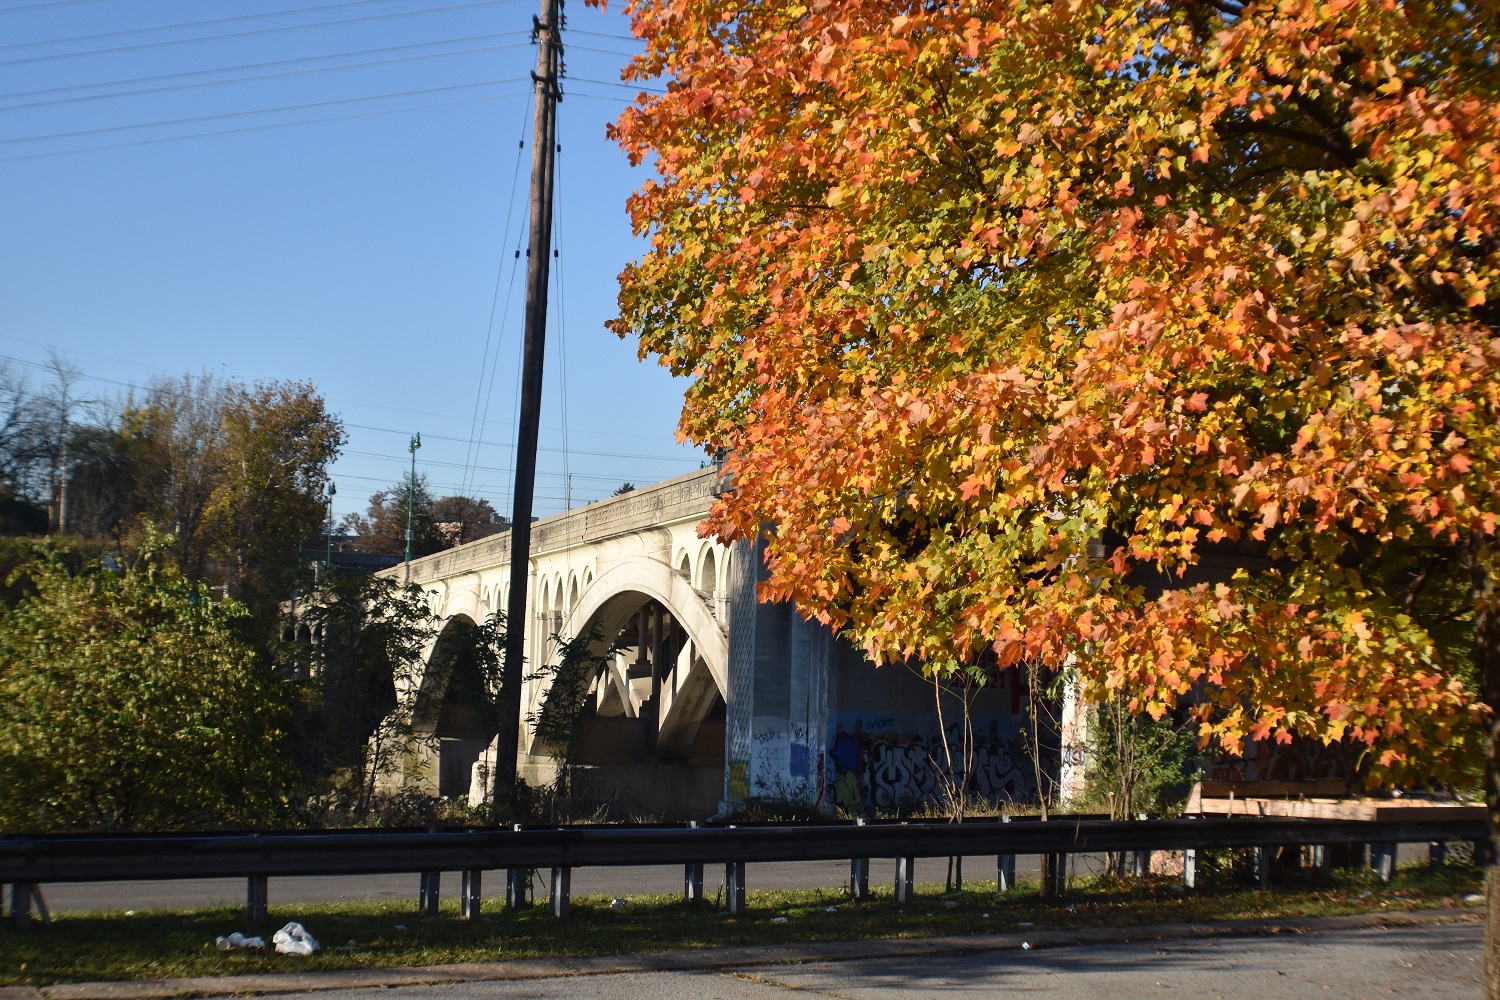 Colorful tree with bridge with large arches in background.